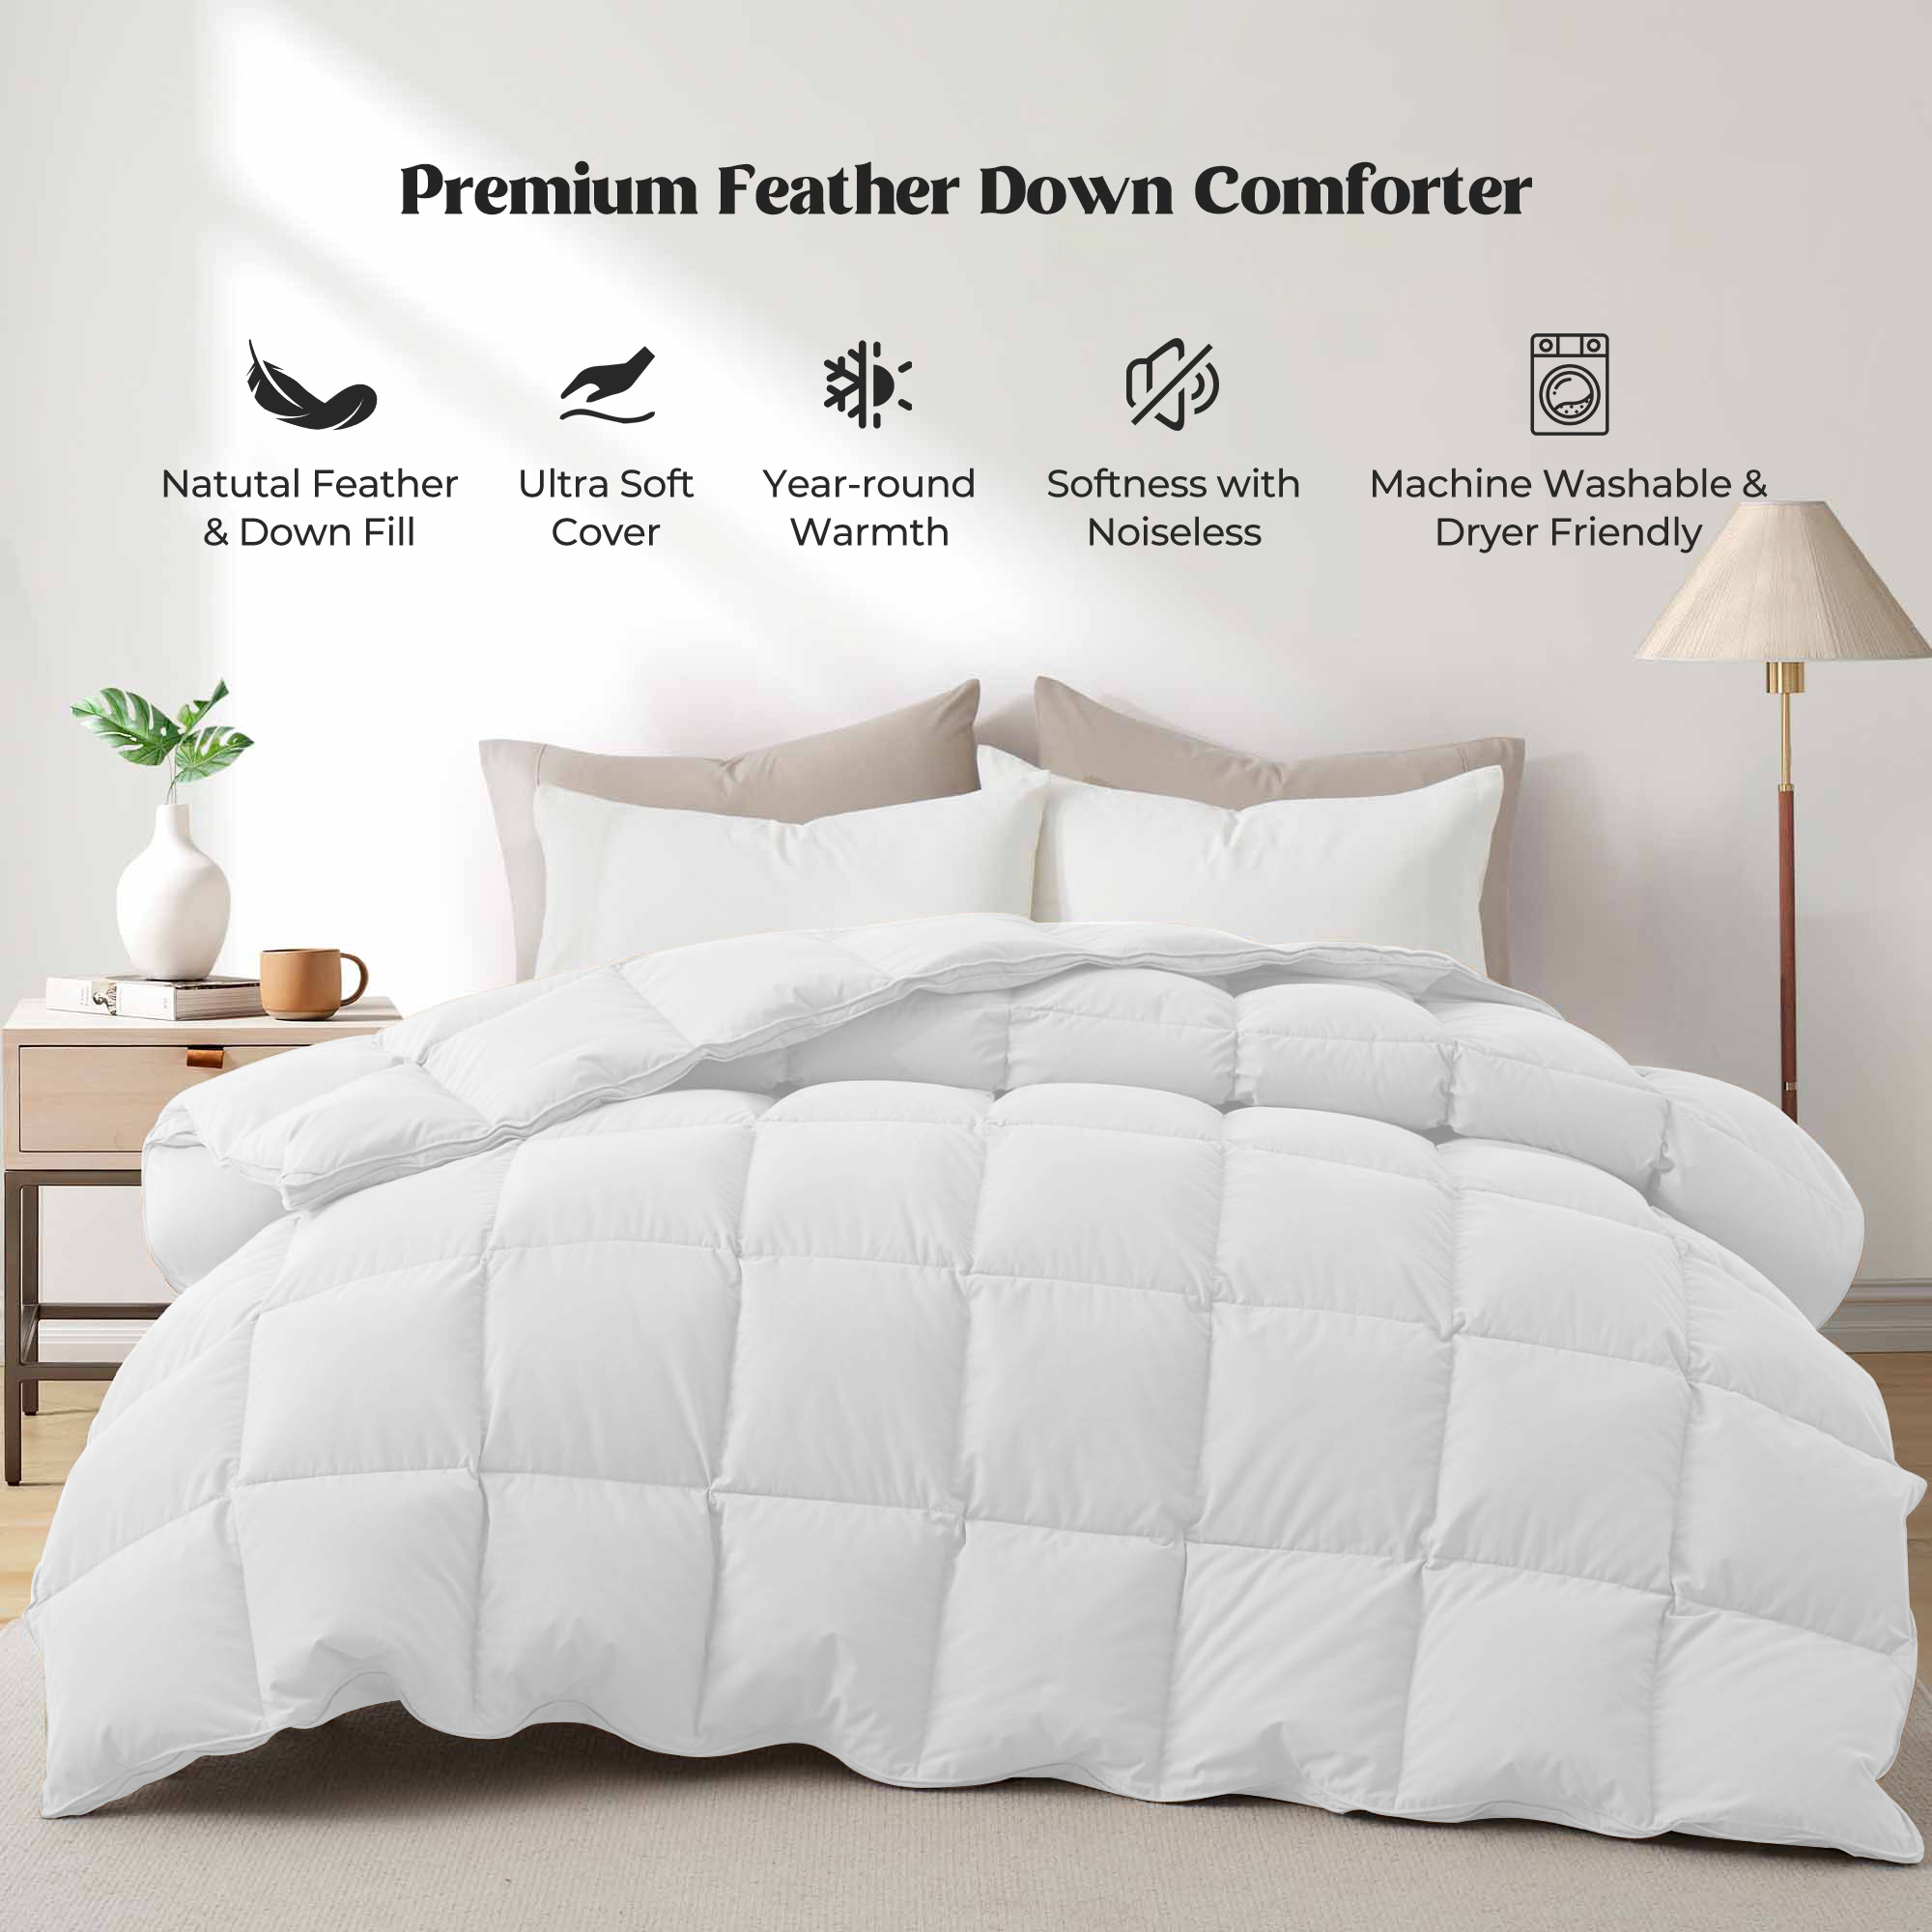 Medium Weight Goose Feather And Down Comforter - White, California King